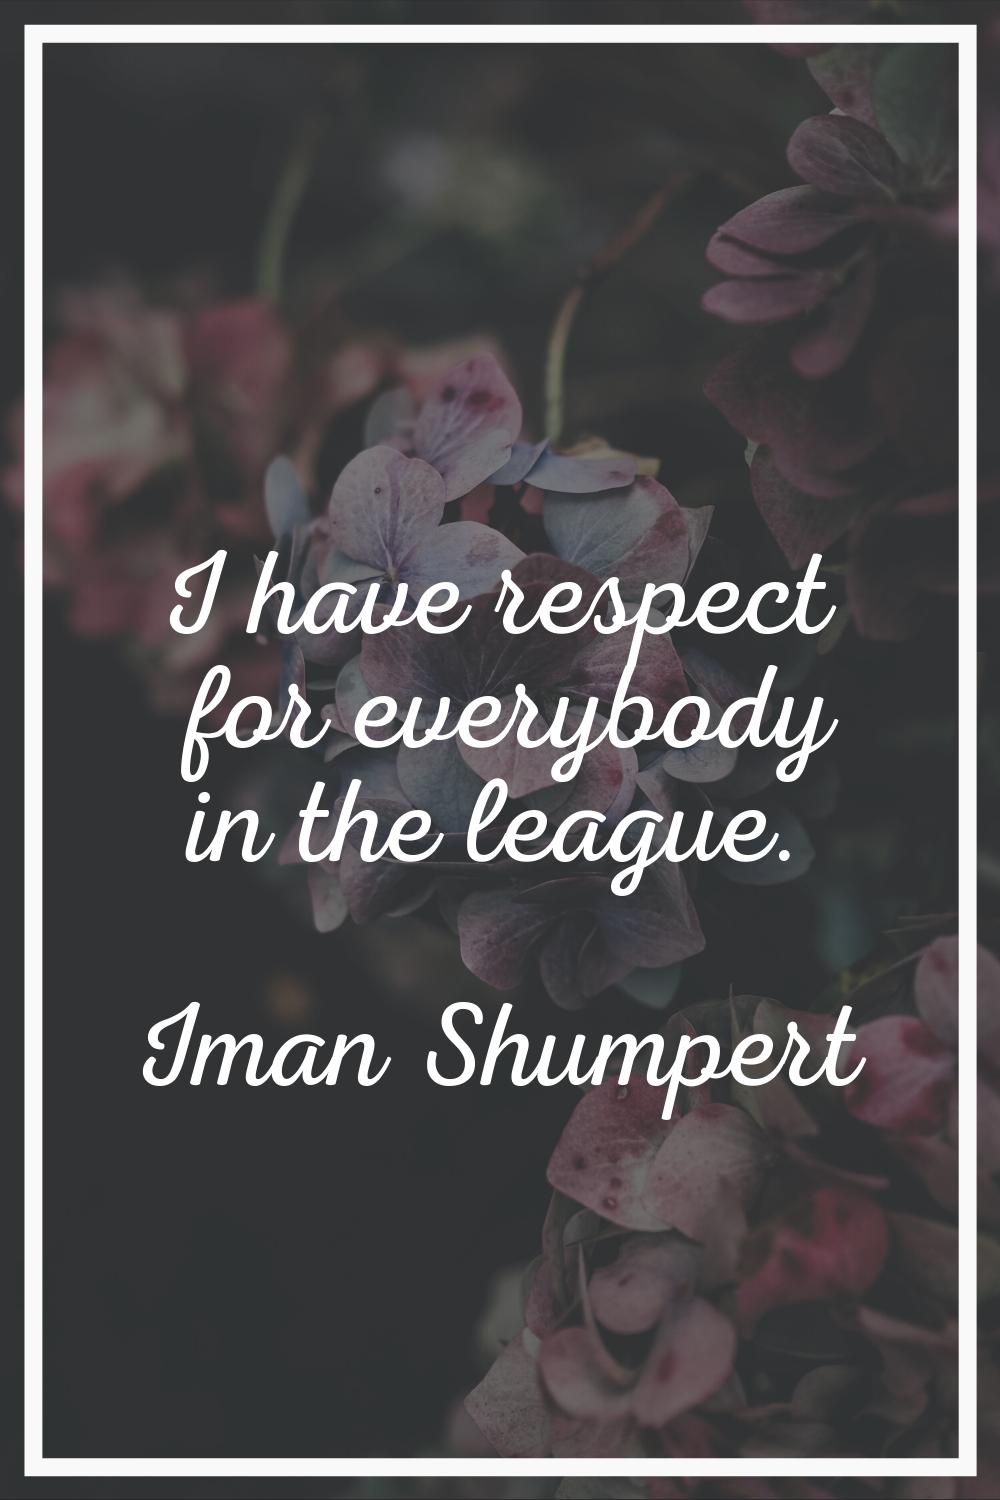 I have respect for everybody in the league.